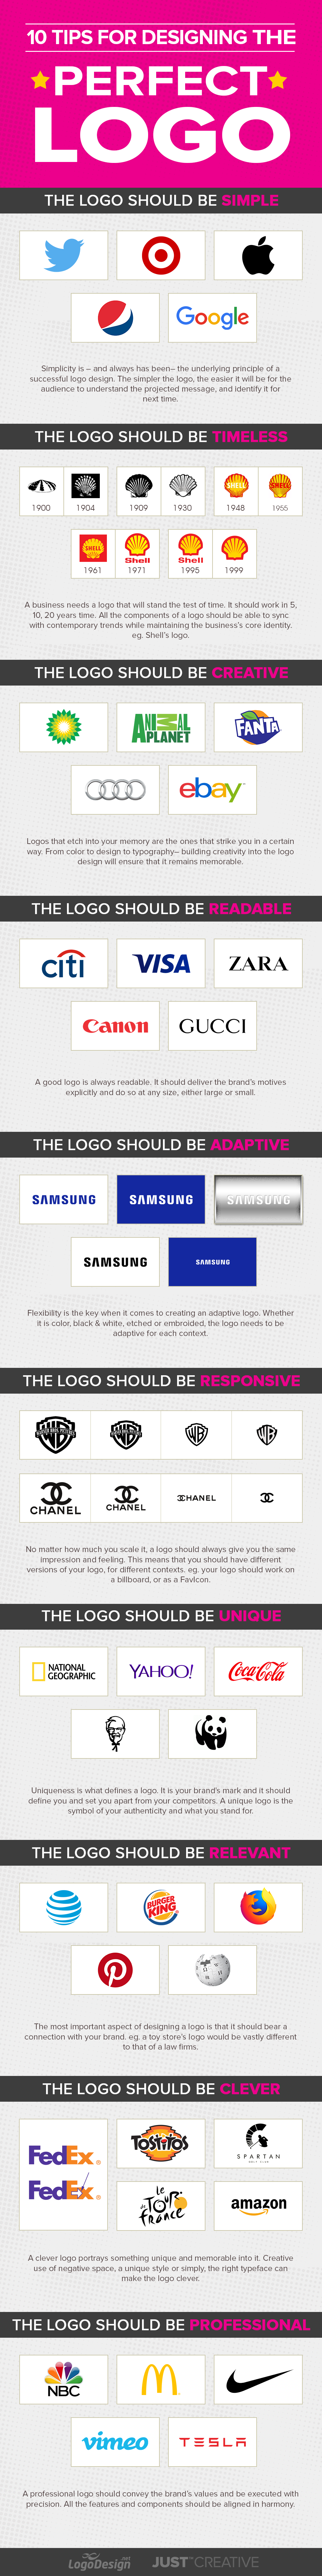 10 Tips for Designing the Perfect Logo - Infographic